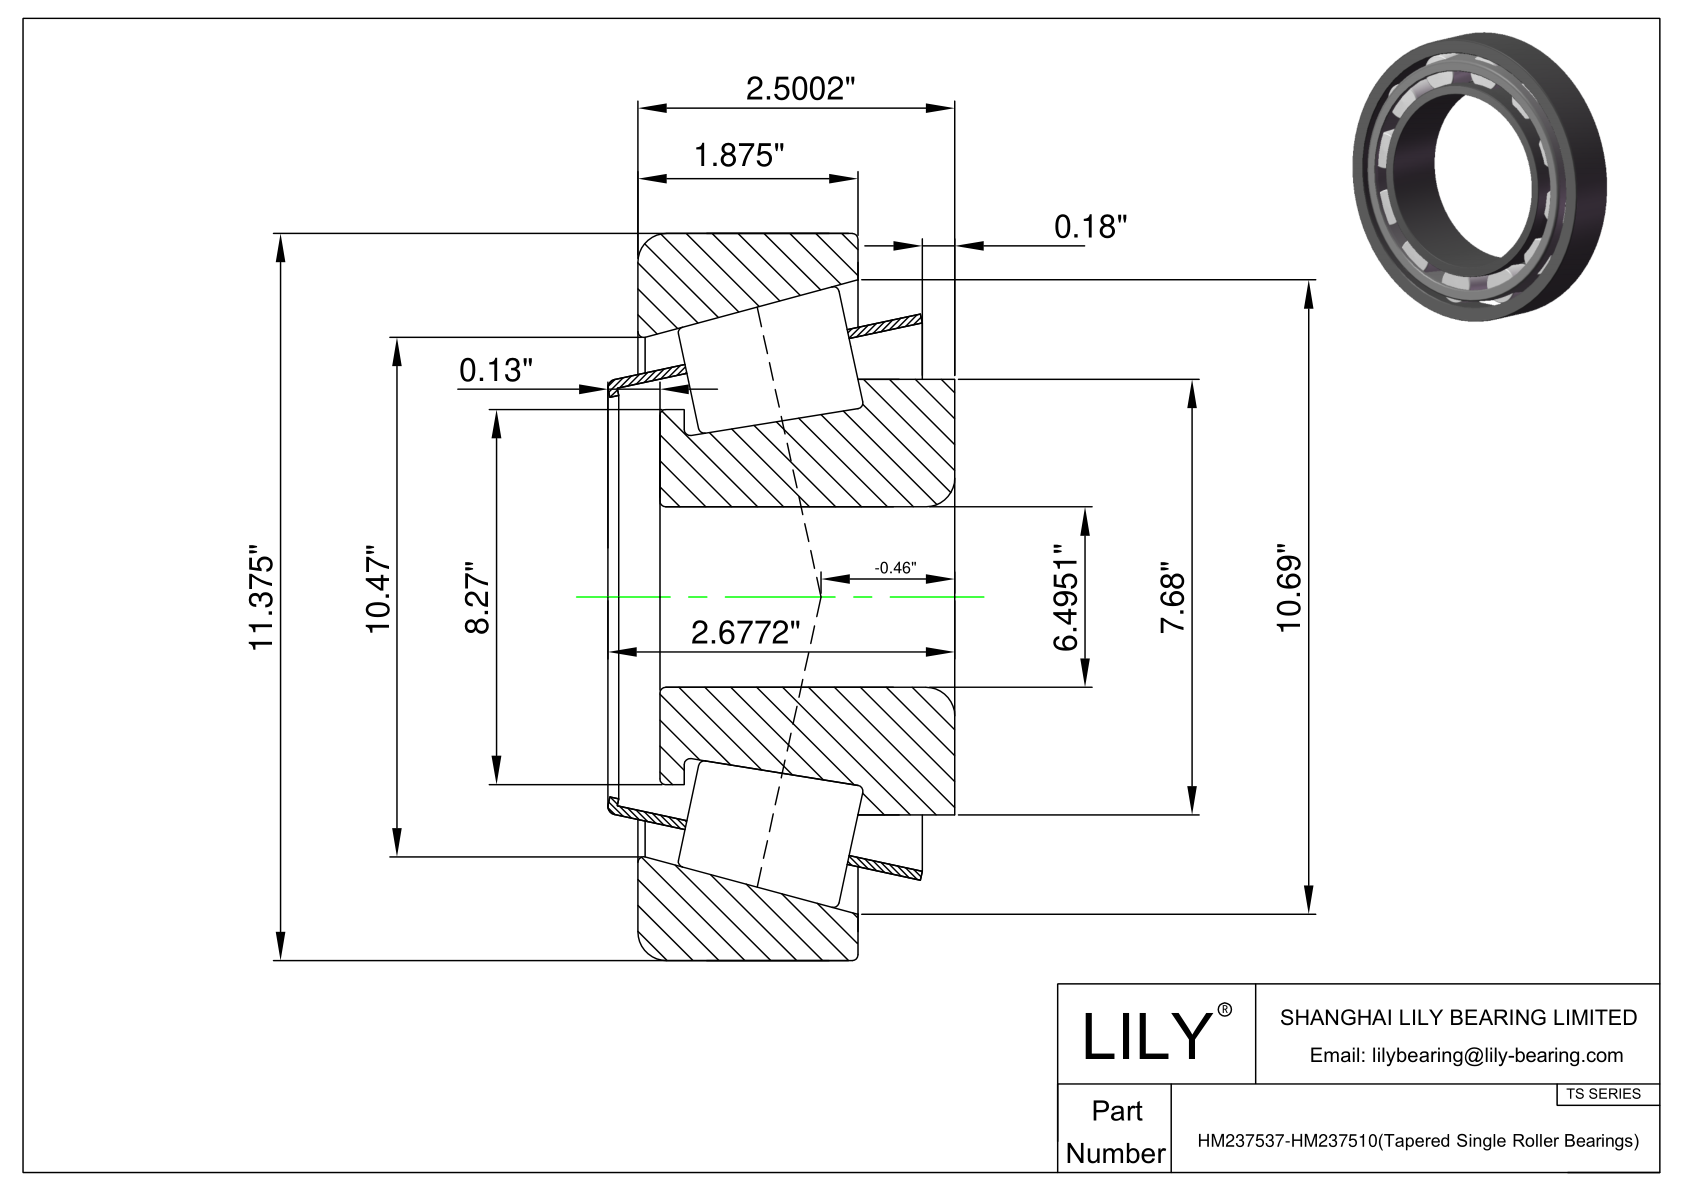 HM237537-HM237510 TS (Tapered Single Roller Bearings) (Imperial) cad drawing